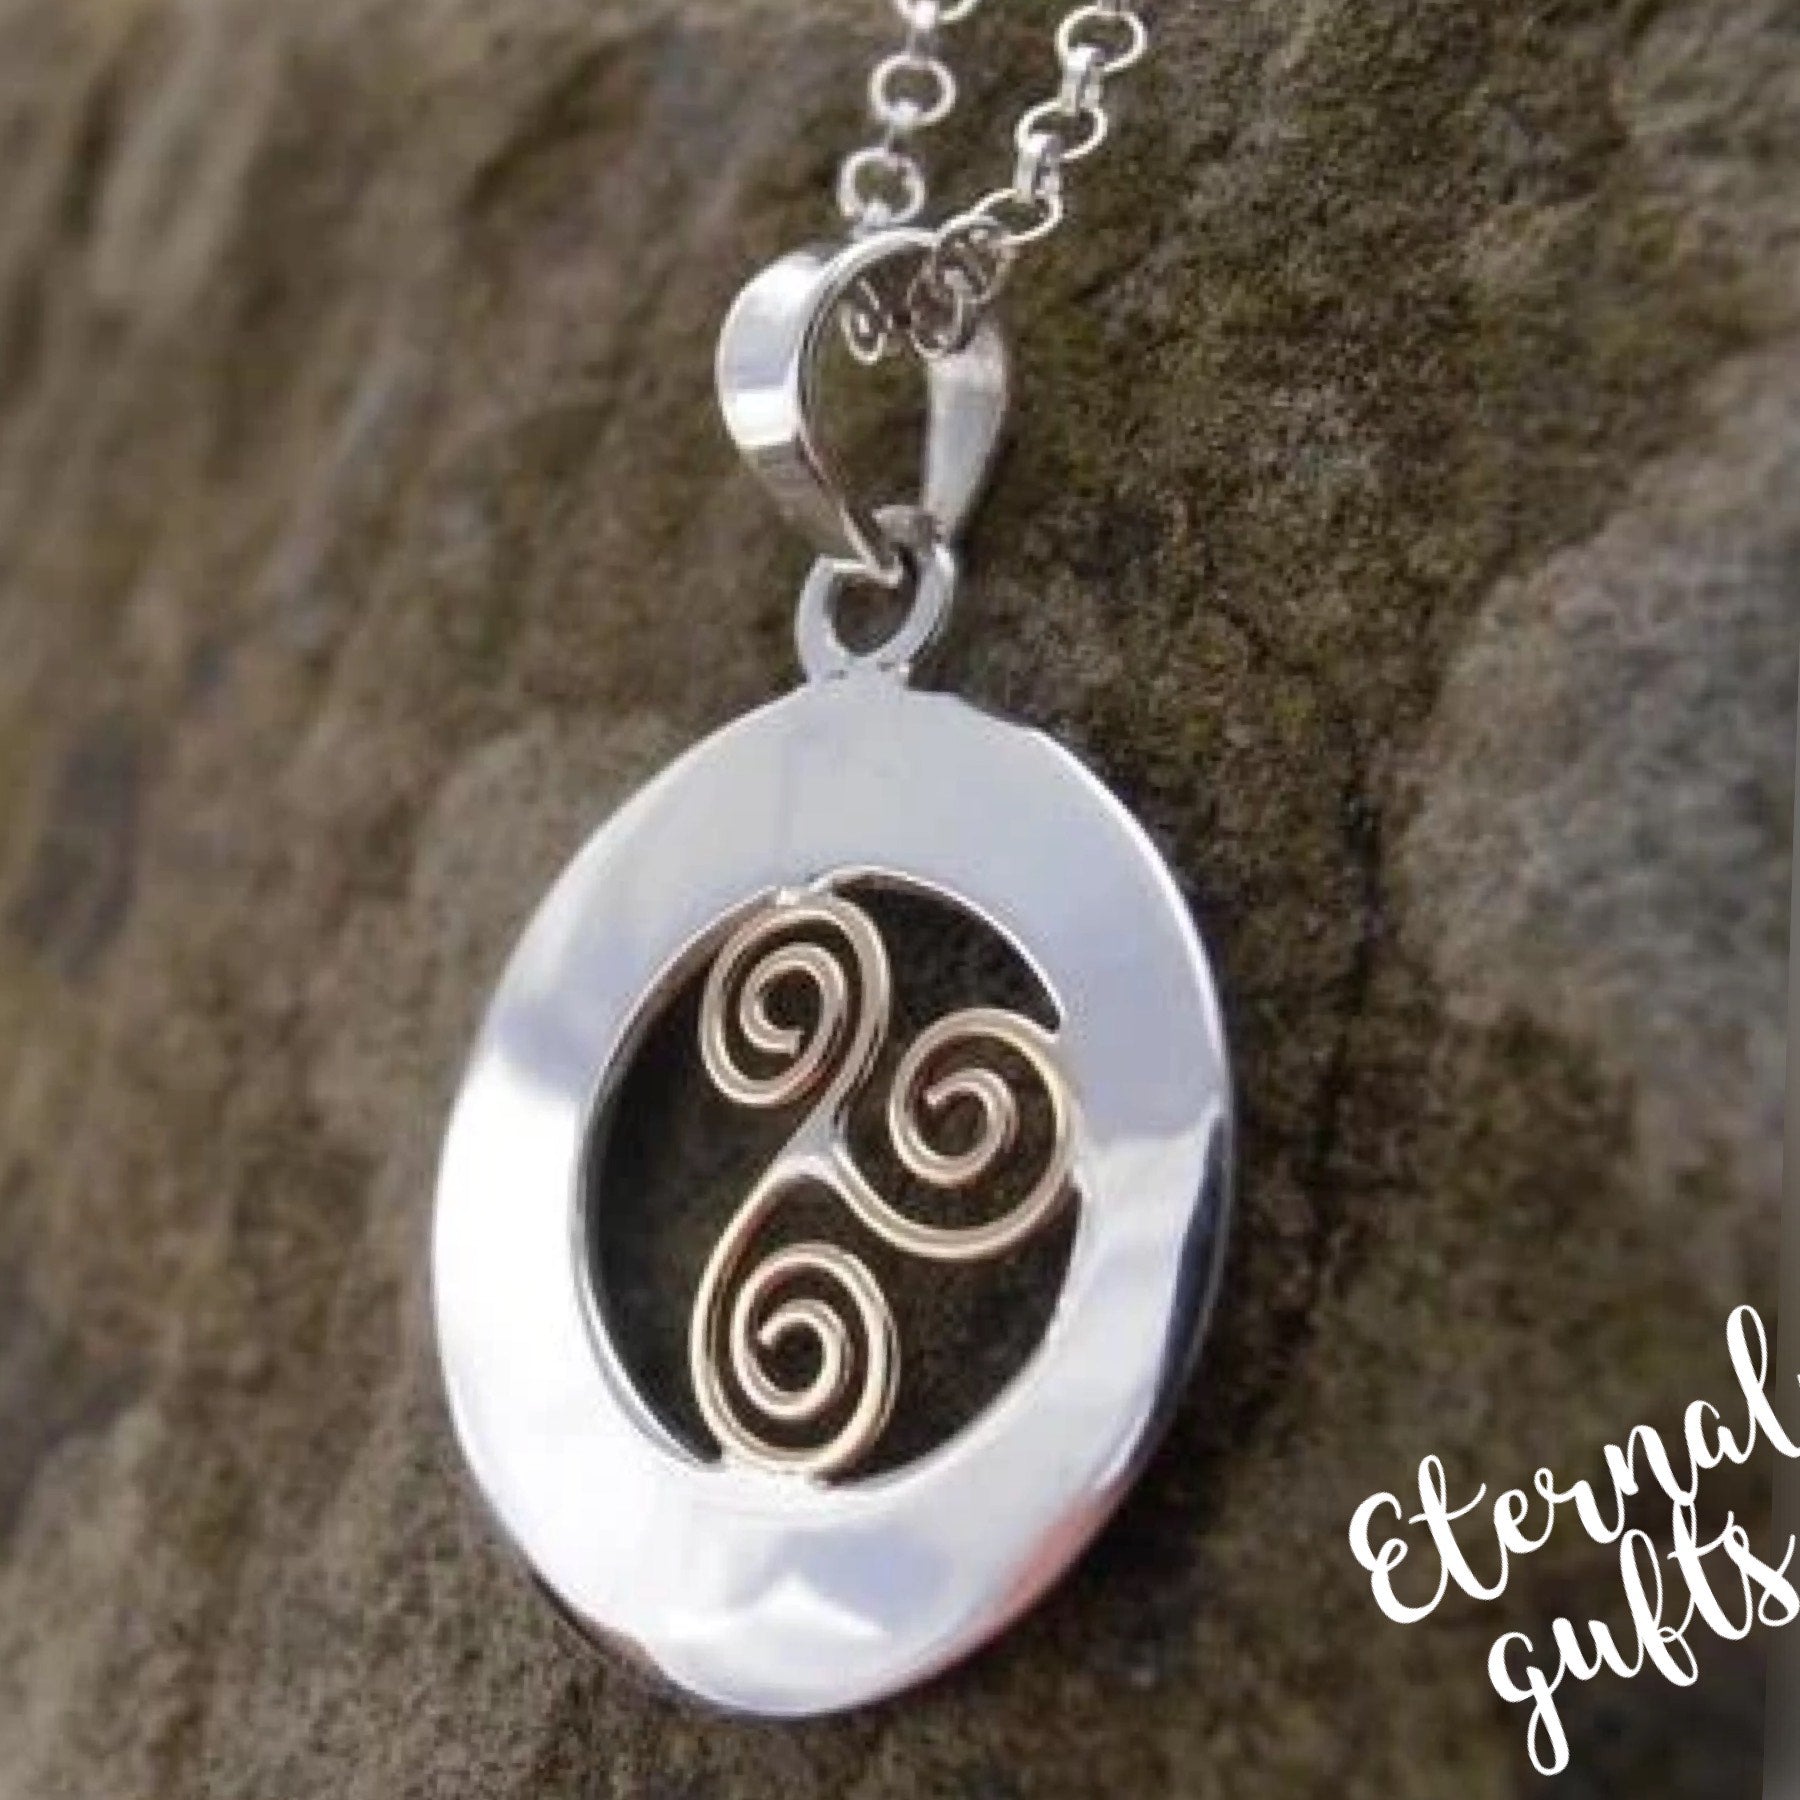 Spiral Offset Pendant, Sterling Silver Pendant with Brass Spiral Detail by Banshee Jewellery